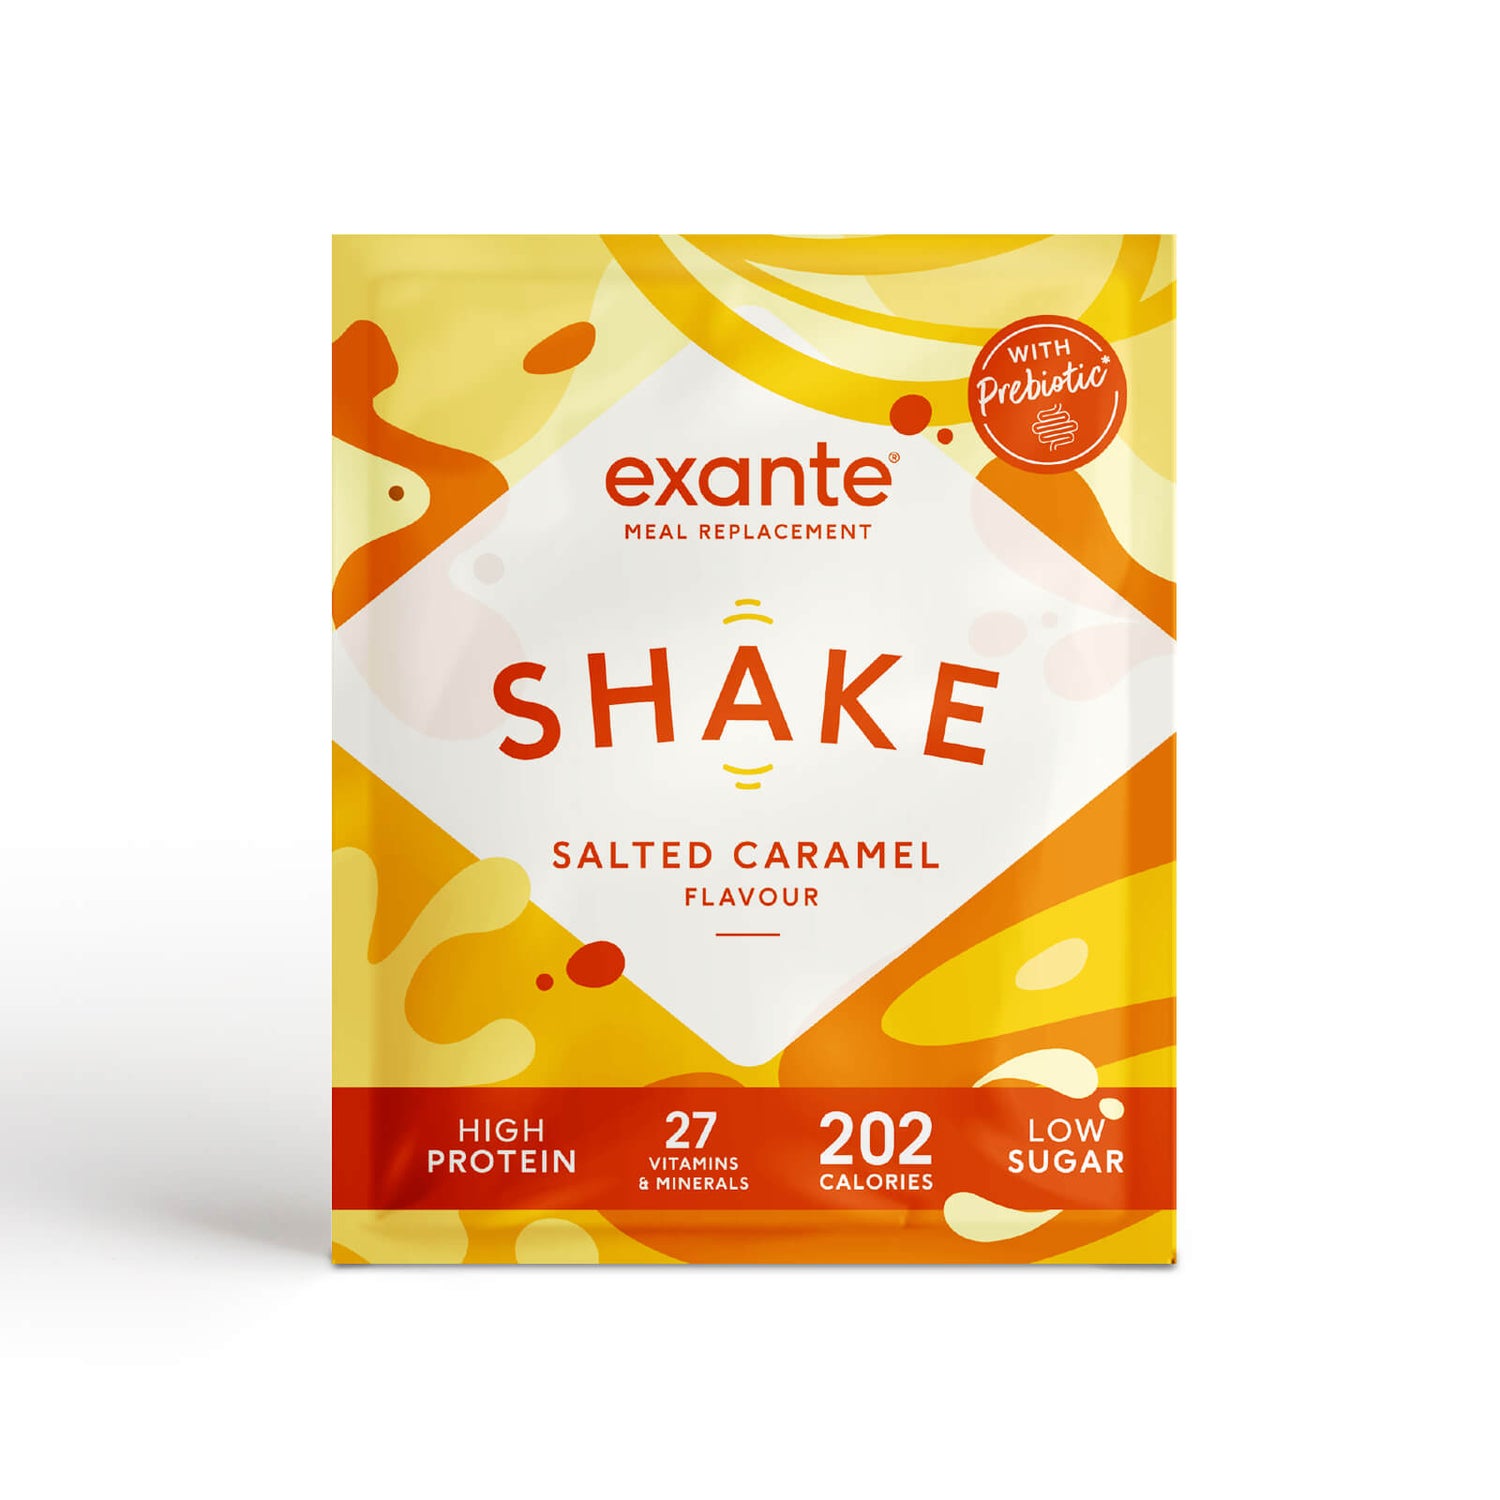 Exante Diet Meal Replacement Shake, Salted Caramel, Single Serving Sachet